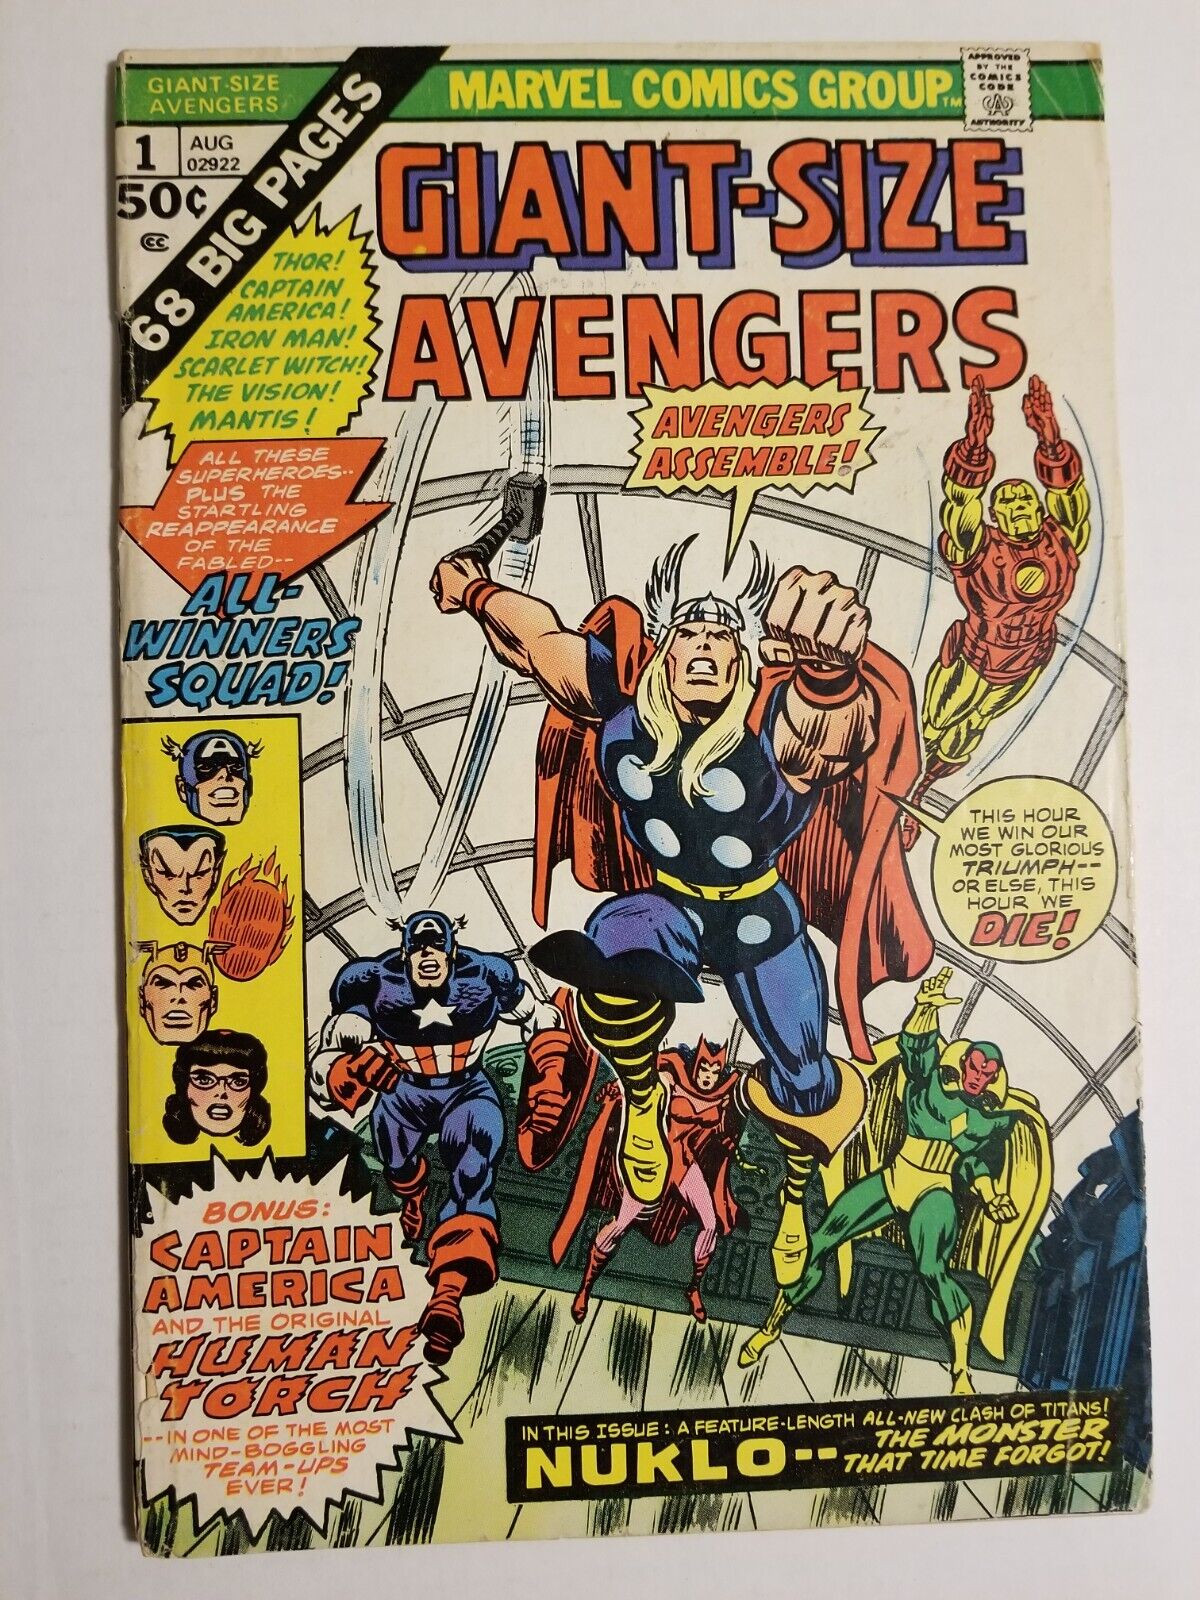 The Avengers (1974) Giant-Size Vol 1 #1 VG